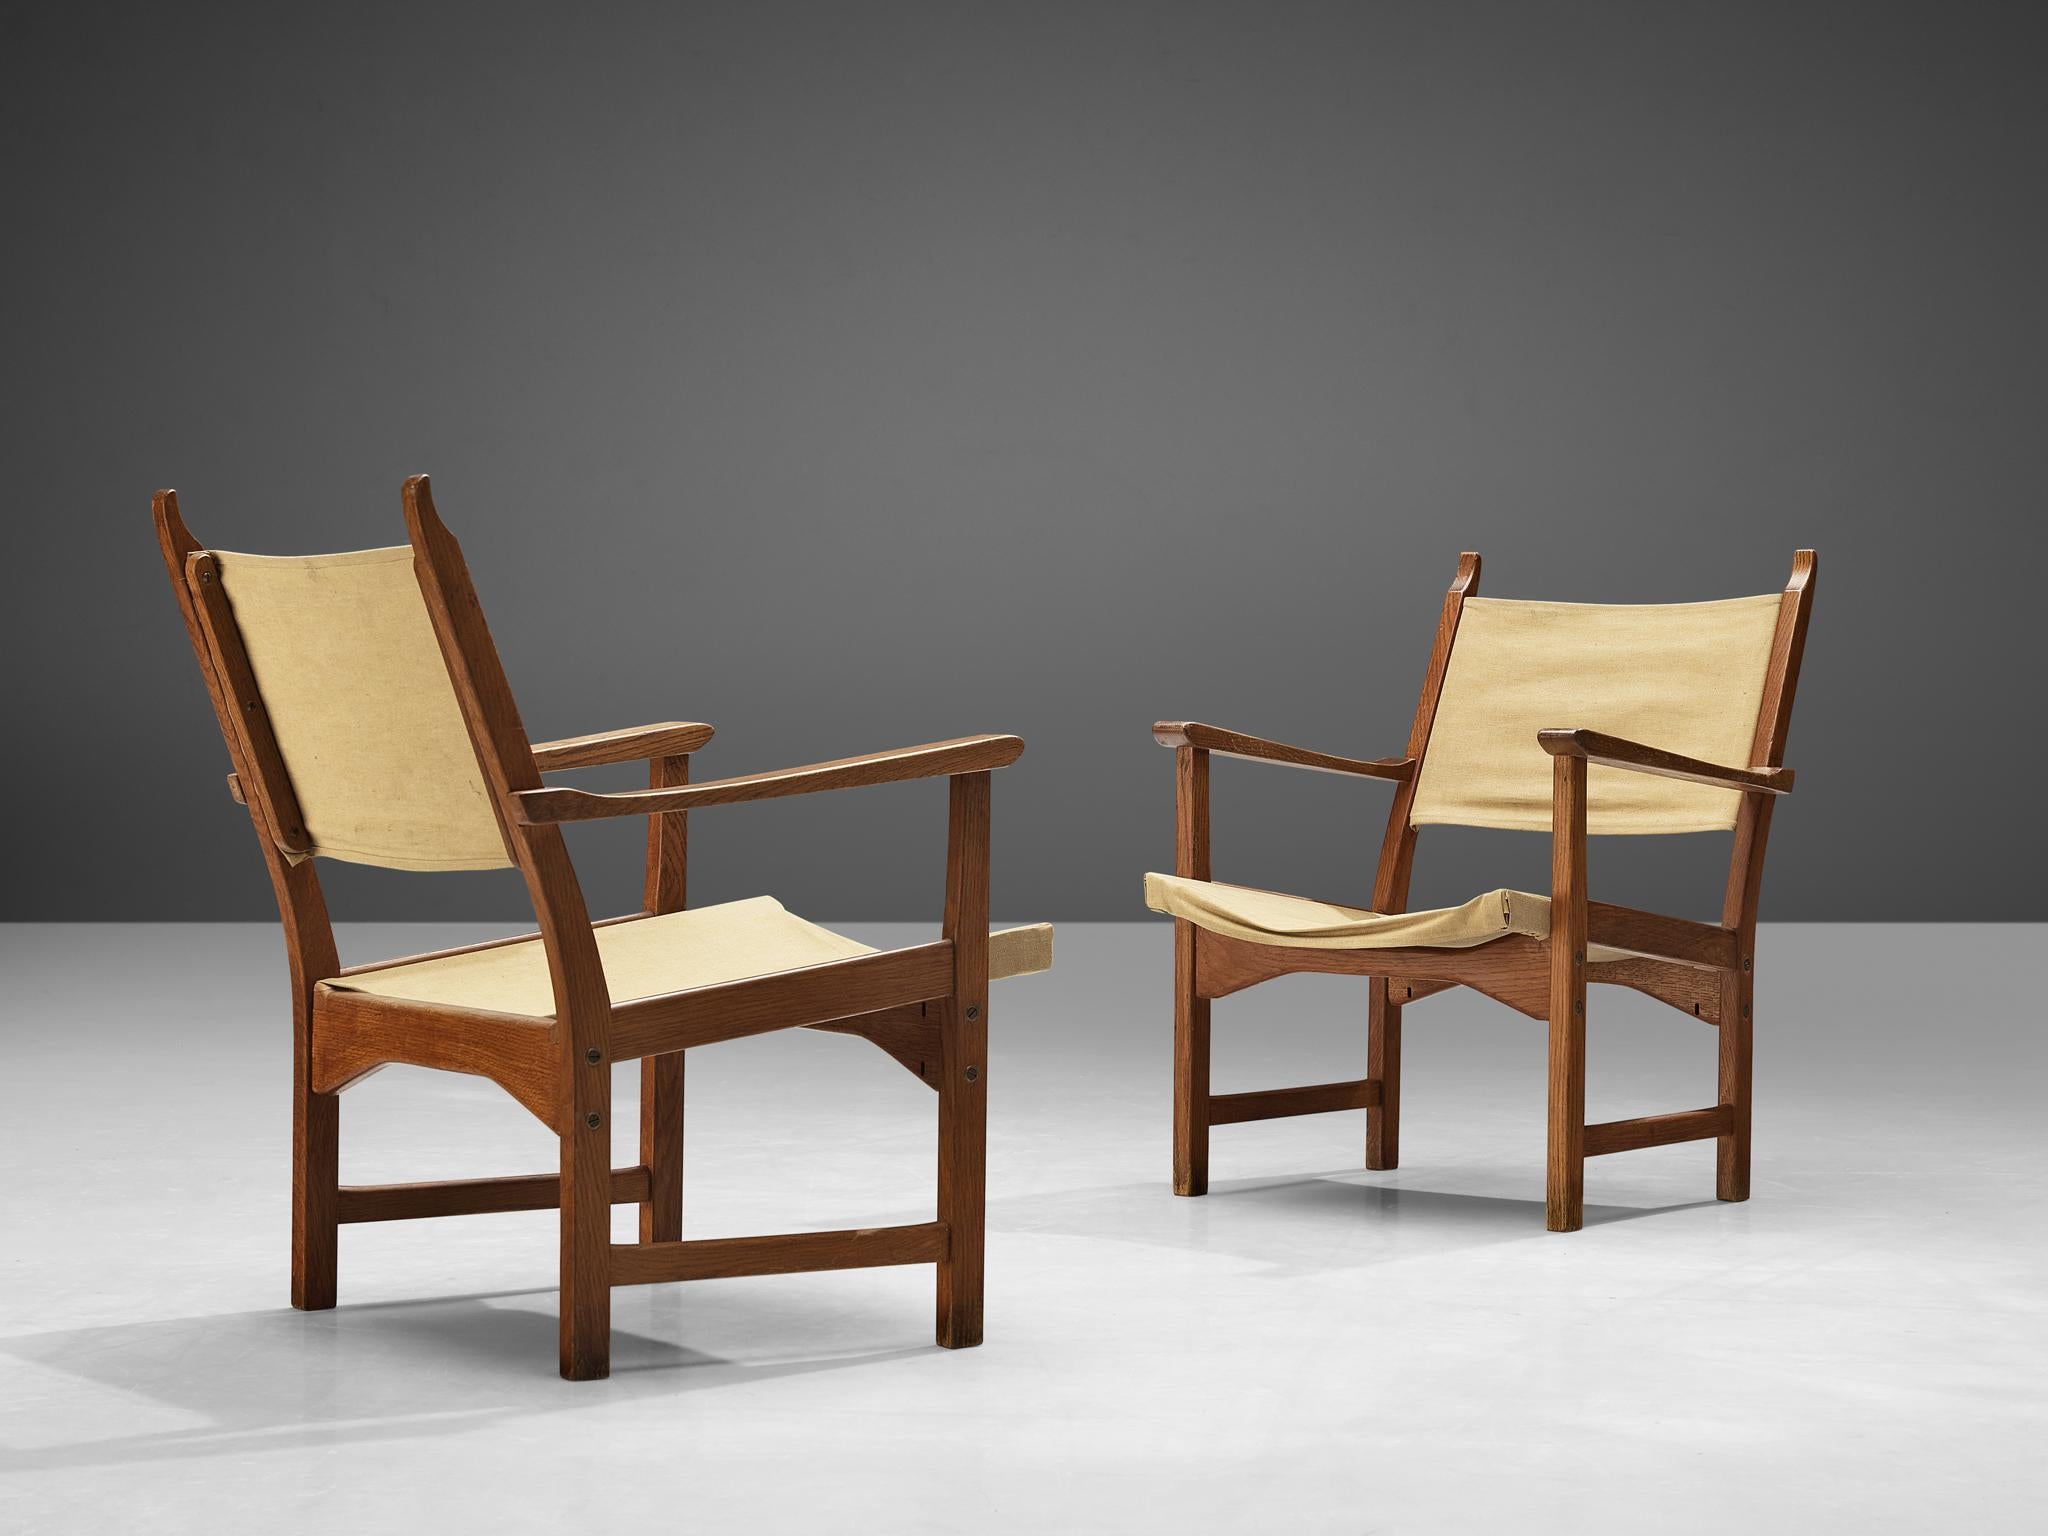 Carl Malmsten and Yngve Ekström for Swedese, pair of 'Caryngo' armchairs, oak, canvas, Sweden, 1955

This Caryngo lounge chair by Carl Malmsten and Yngve Ekström features an oak frame and canvas seating. The linen is securely attached within the